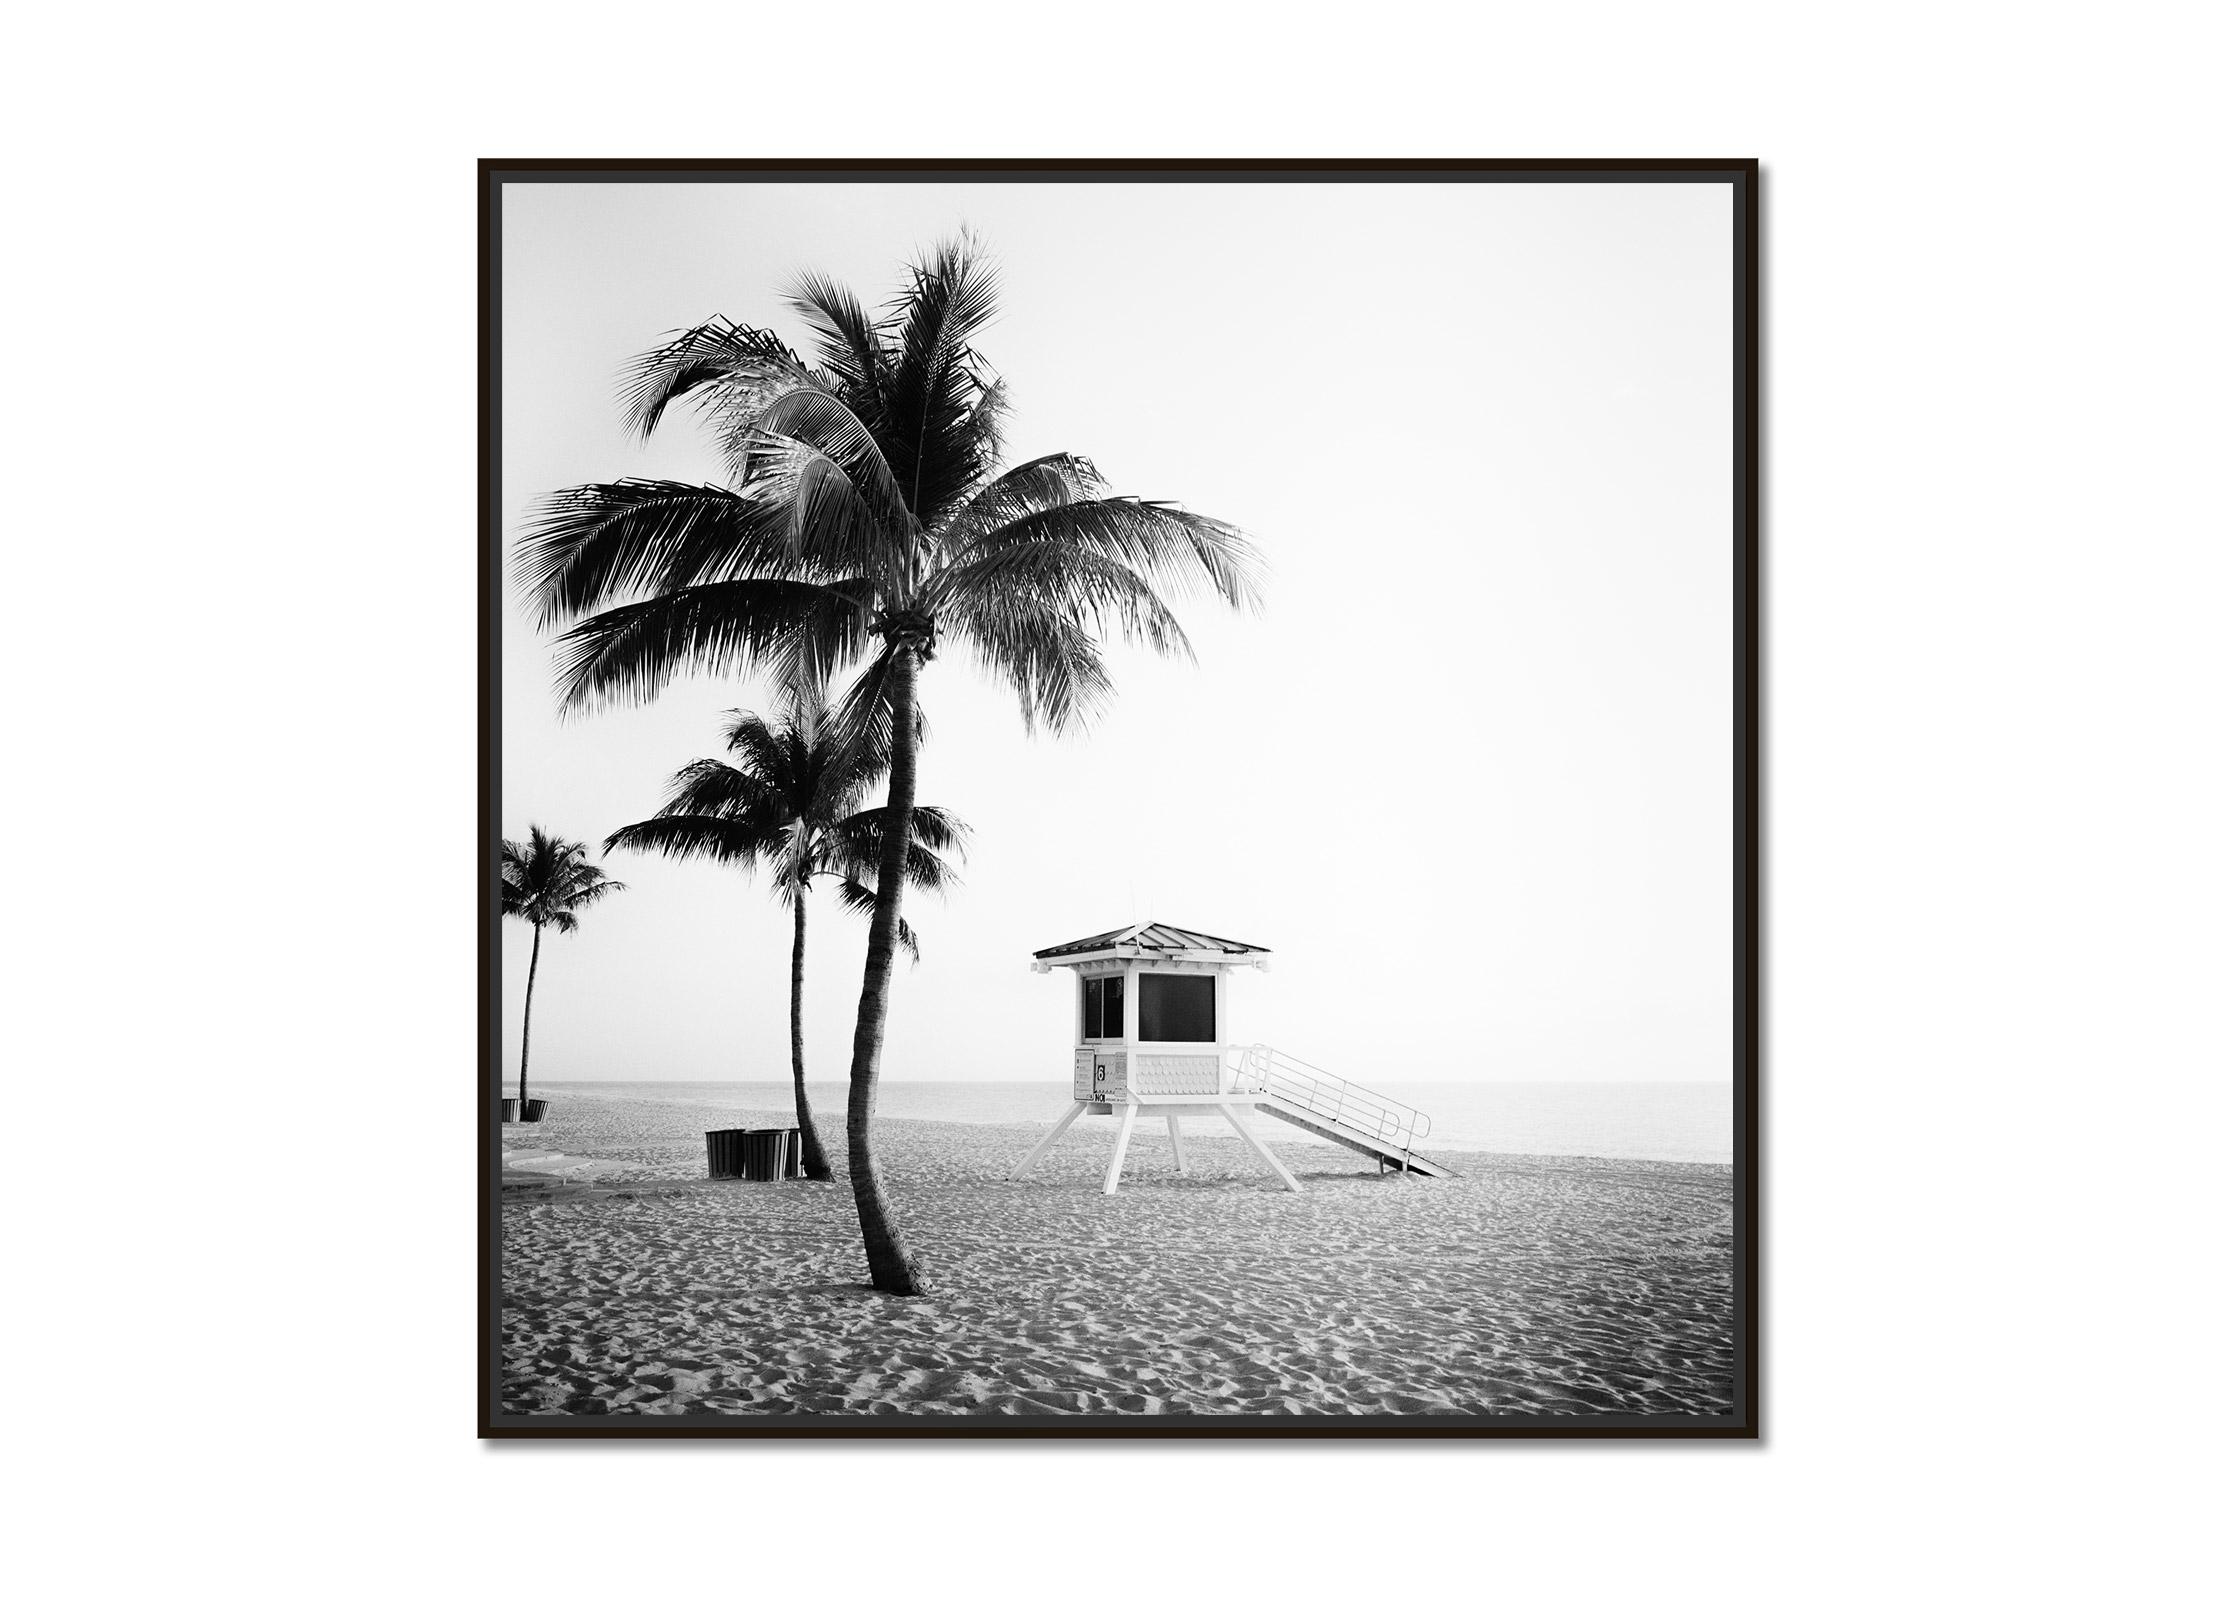 Fort Lauderdale Beach, Florida, USA, black and white art landscape photography - Photograph by Gerald Berghammer